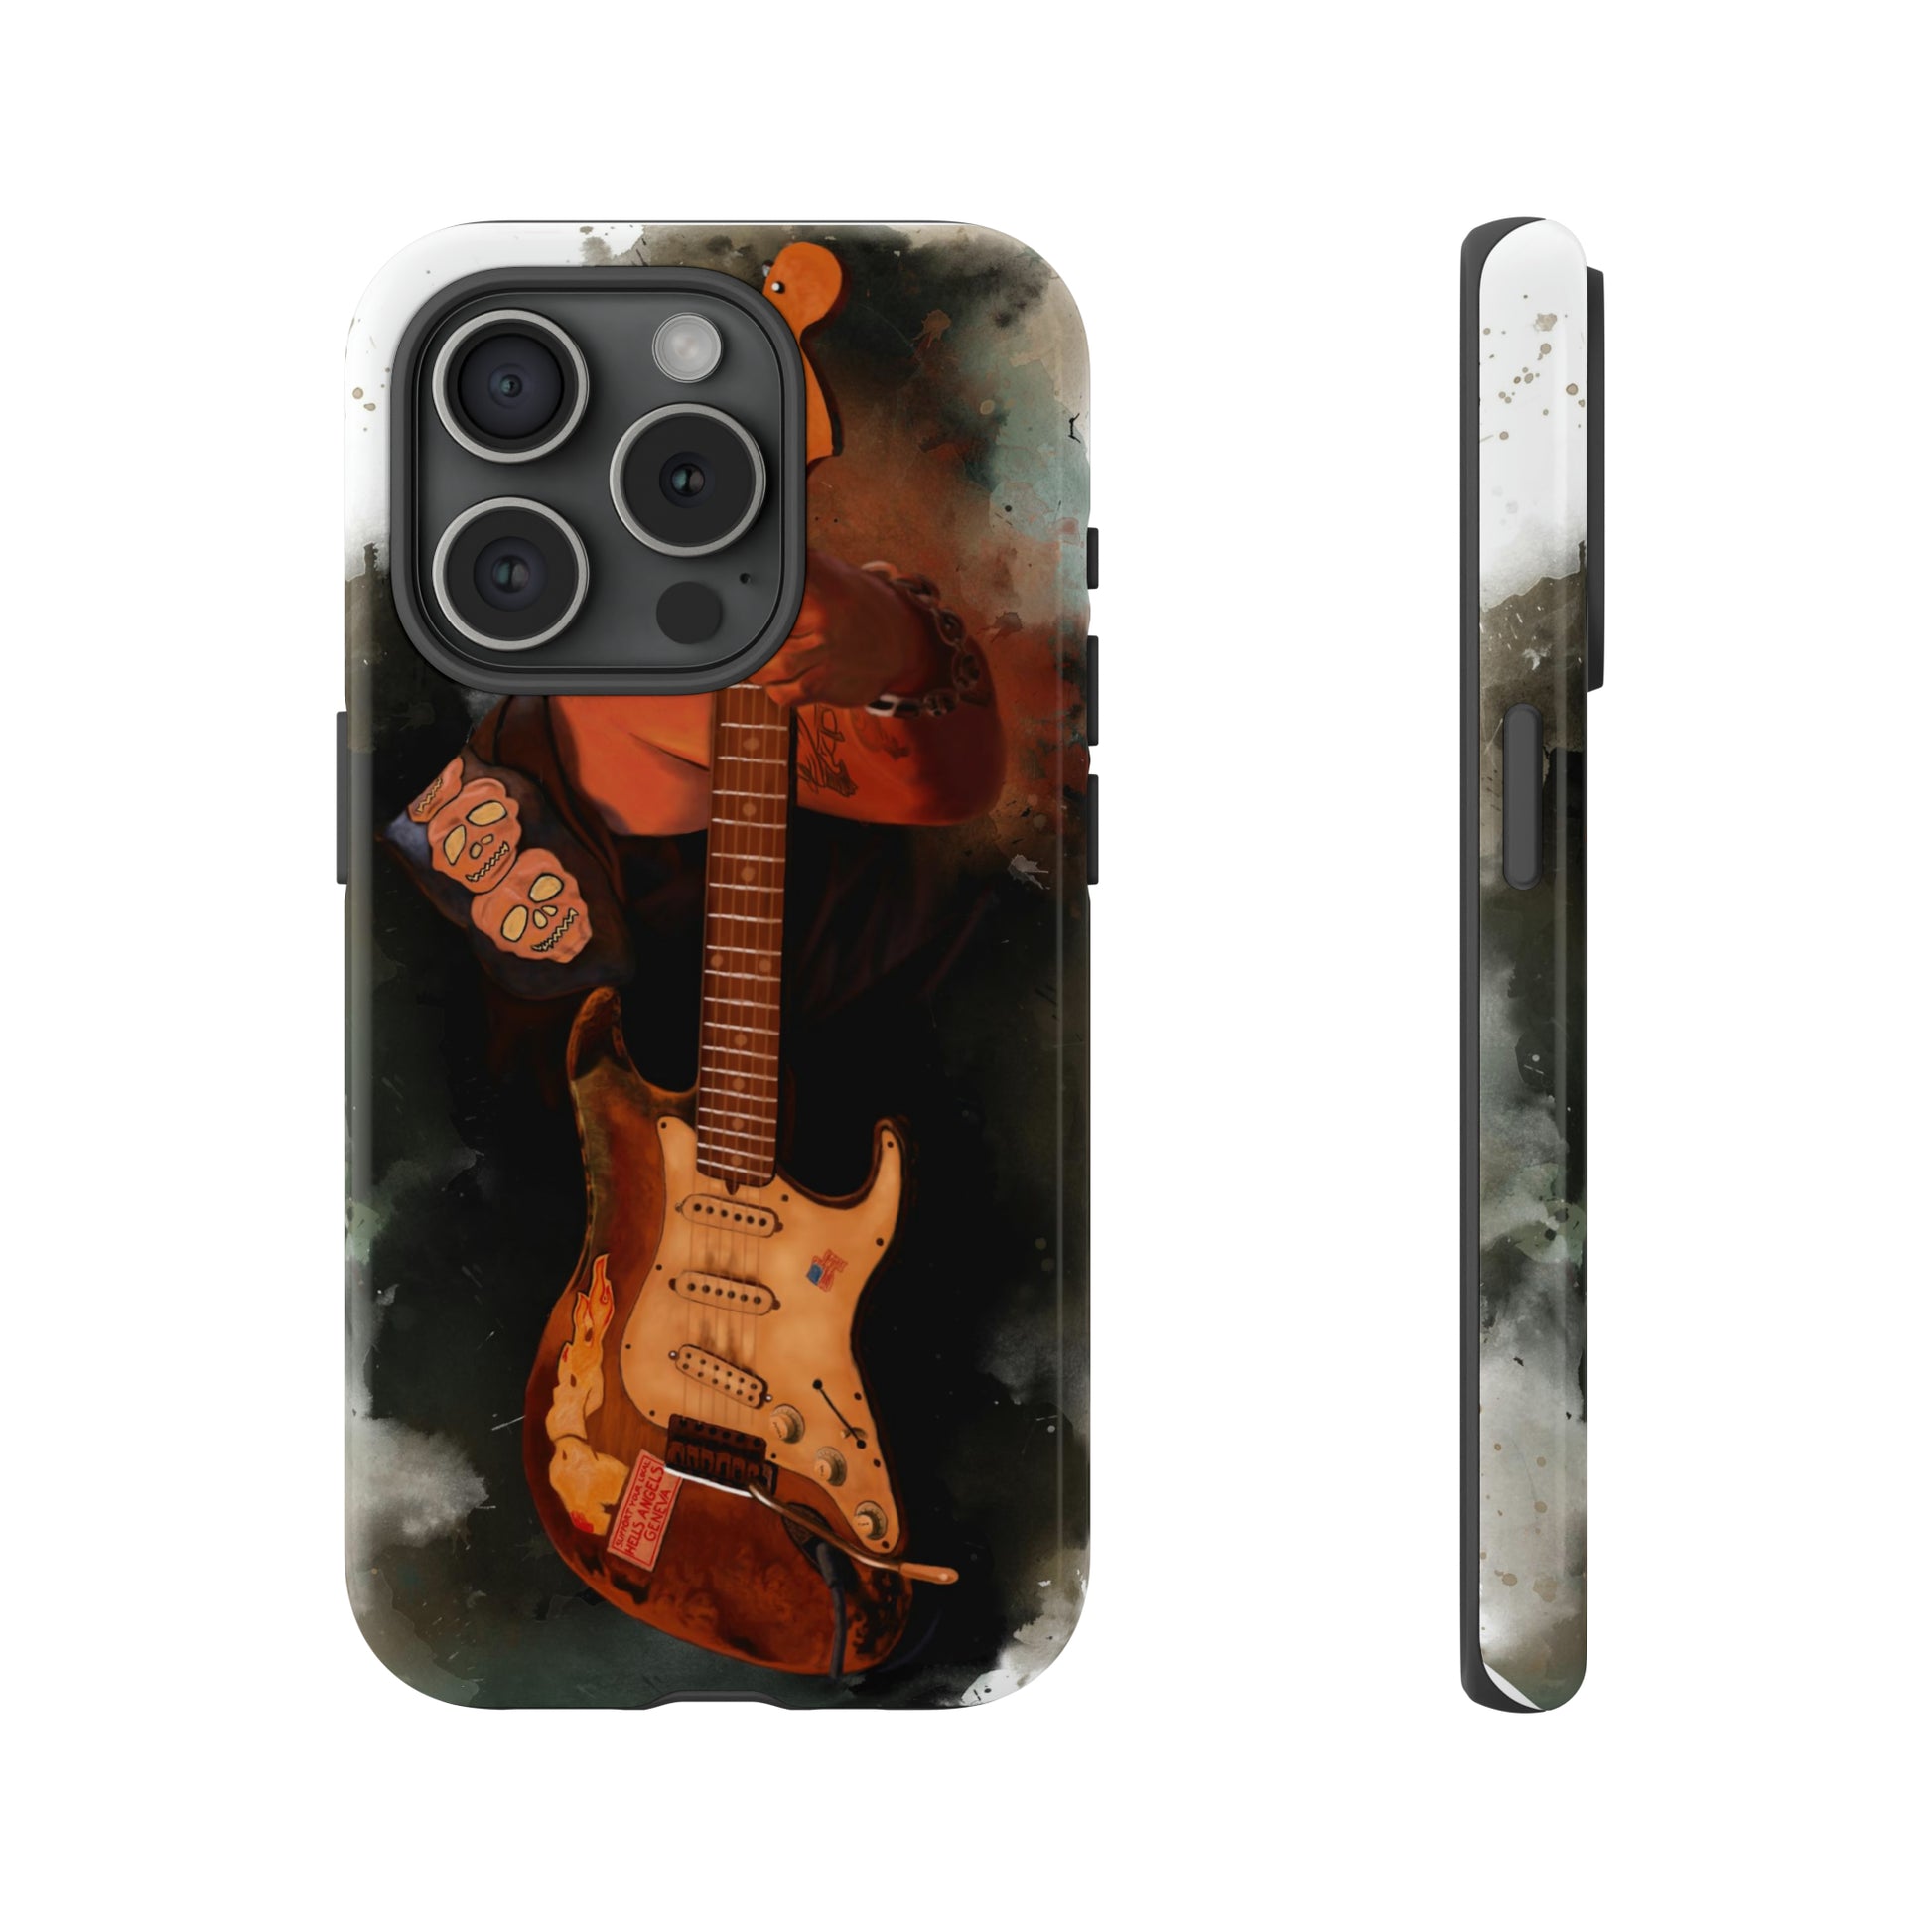 Digital painting of a heavy used vintage sunburst electric guitar with hand printed on iphone phone case